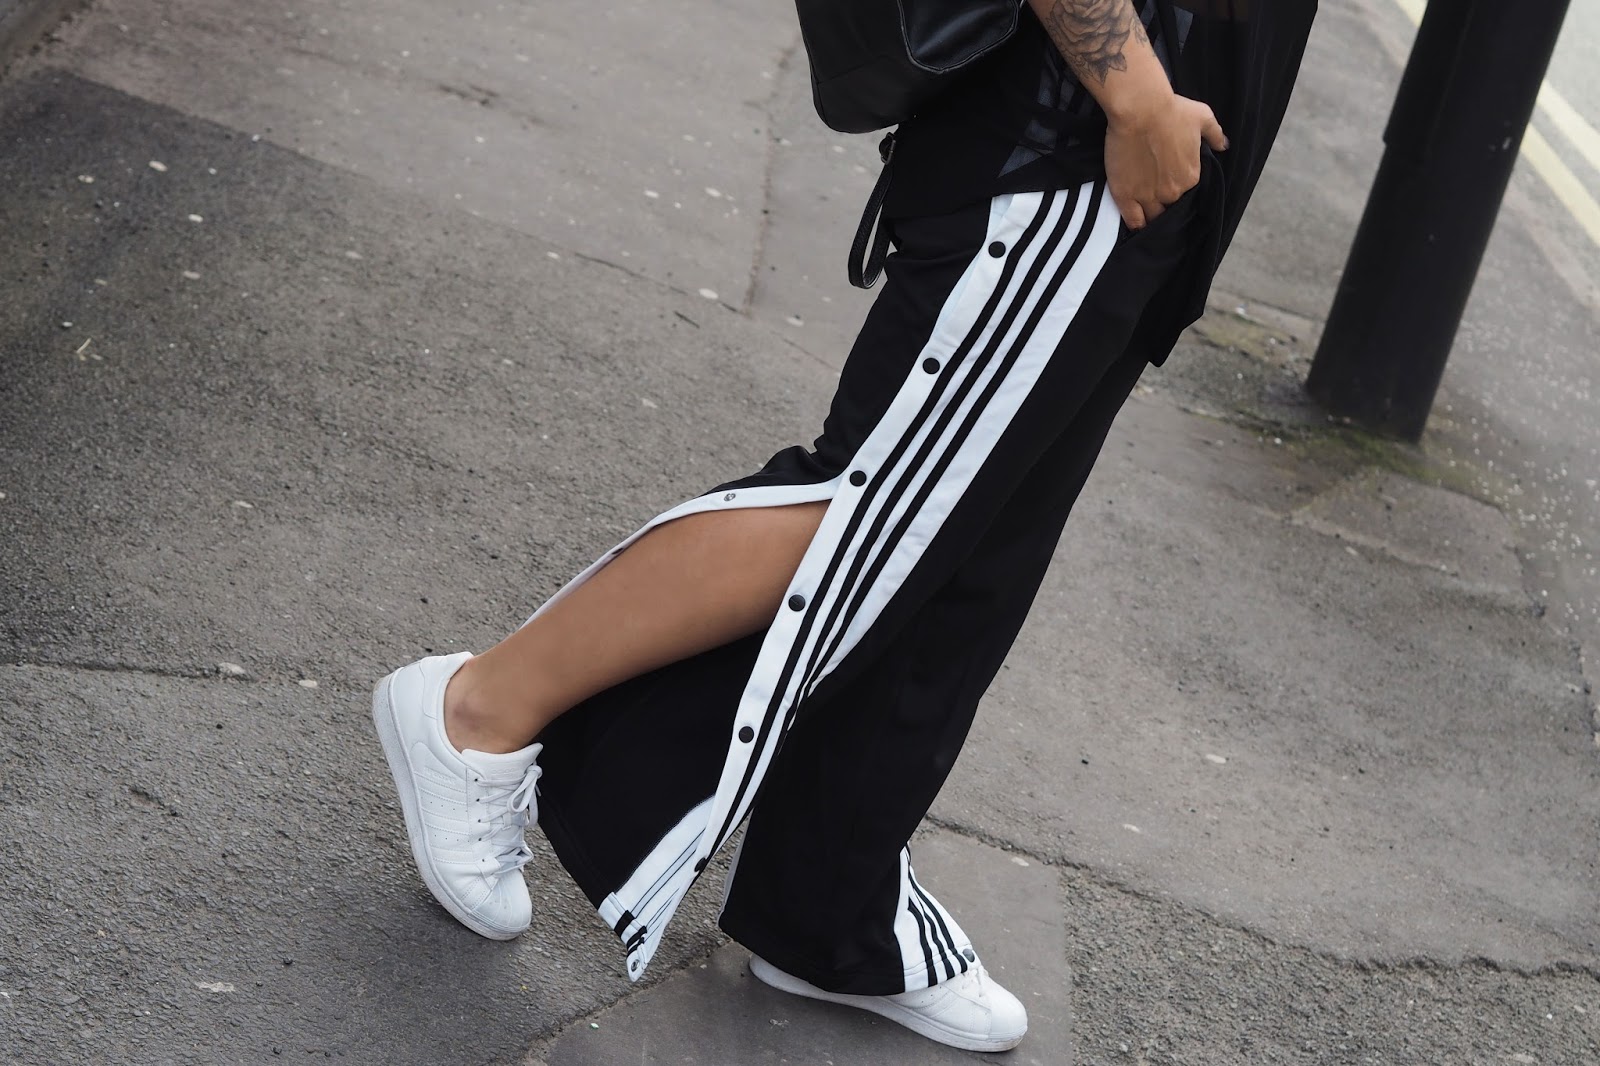 adidas tracksuit bottoms poppers